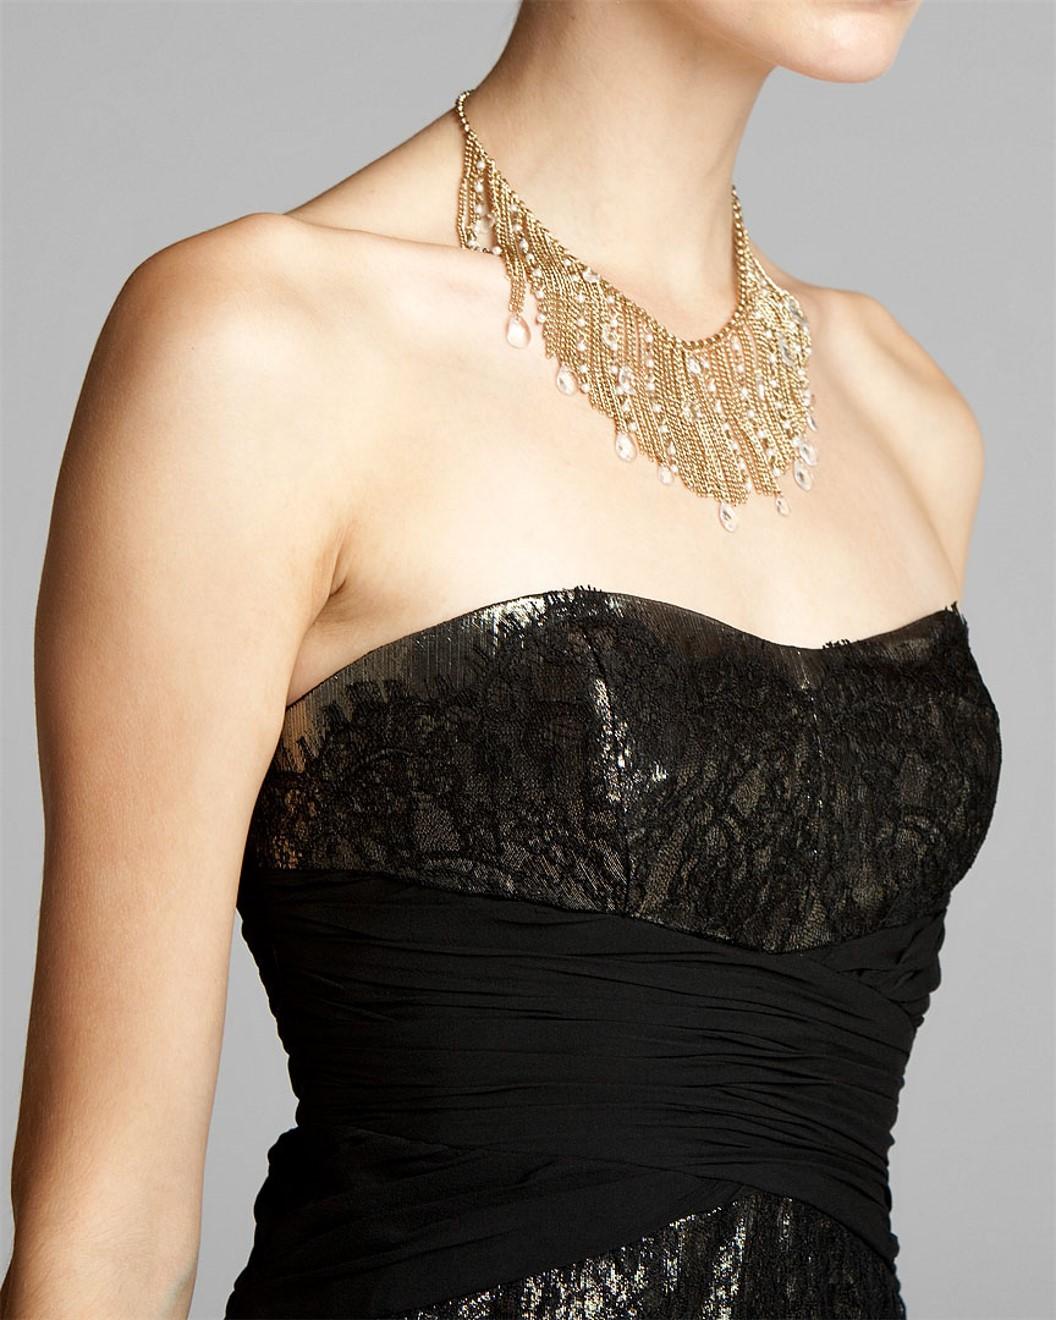 Badgley Mischka Dress
Brand New with Tags
Black and Gold Lame' Dress
Strapless with Boning at Bodice for Support
Black Lace over Gold Lame'
Fully Lined
Center Back Zipper Closure
Shell: 63% Silk, 37% Metallic 
Lining: 100% Polyester
We are happy to